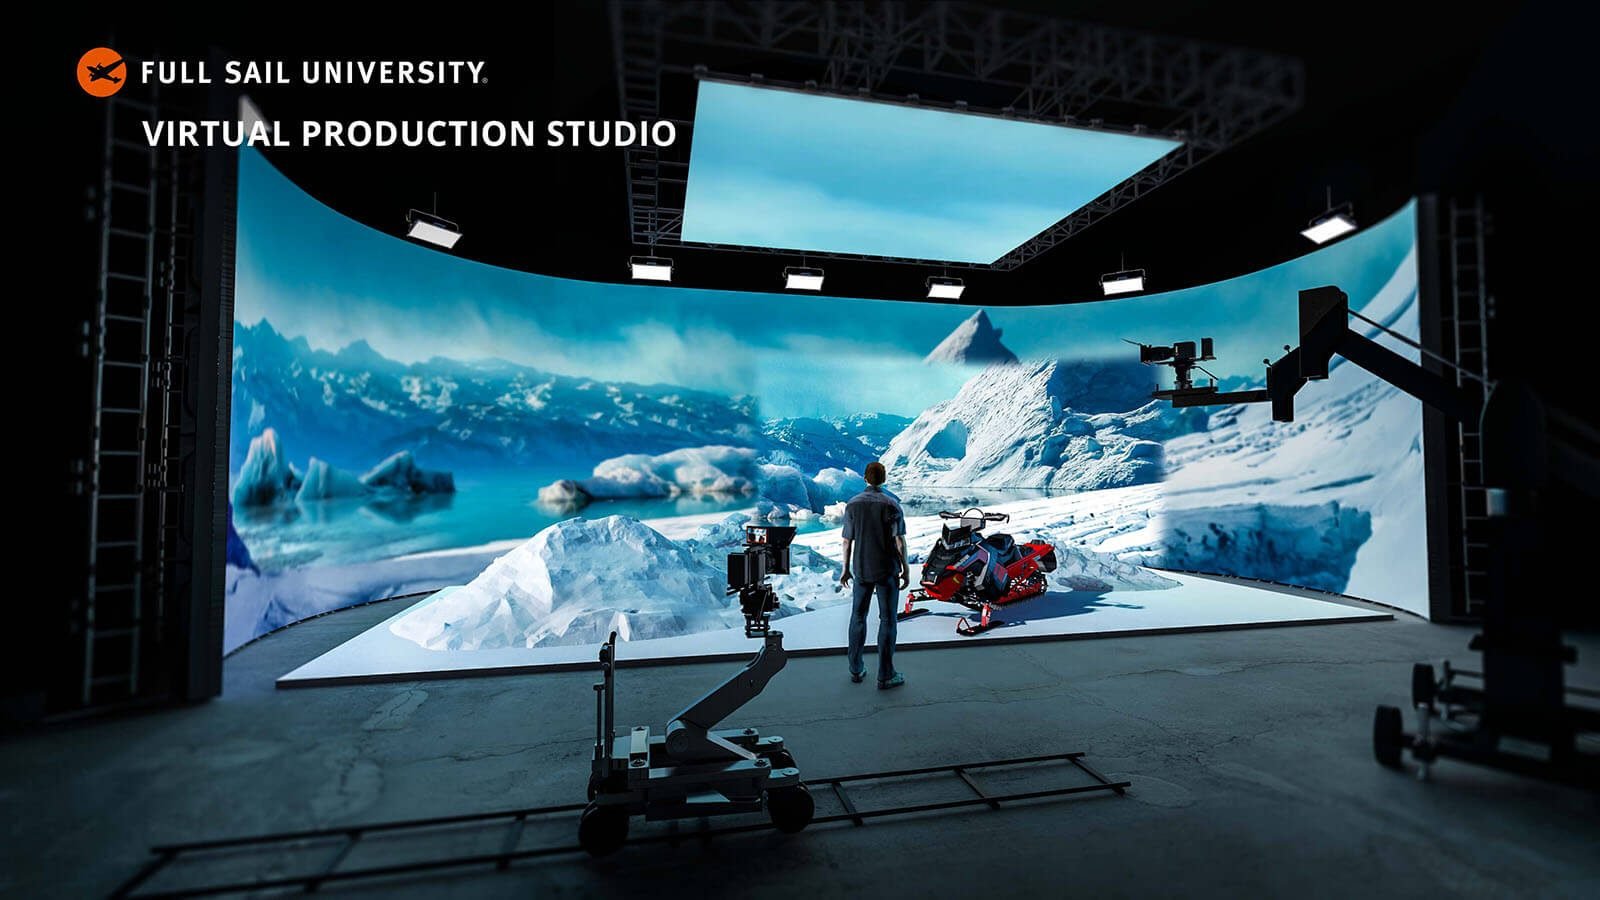 A man wearing jeans, sneakers, and a plaid shirt stands in a production studio. He is facing a large LED screen showing an icy mountain range and a snowmobile.